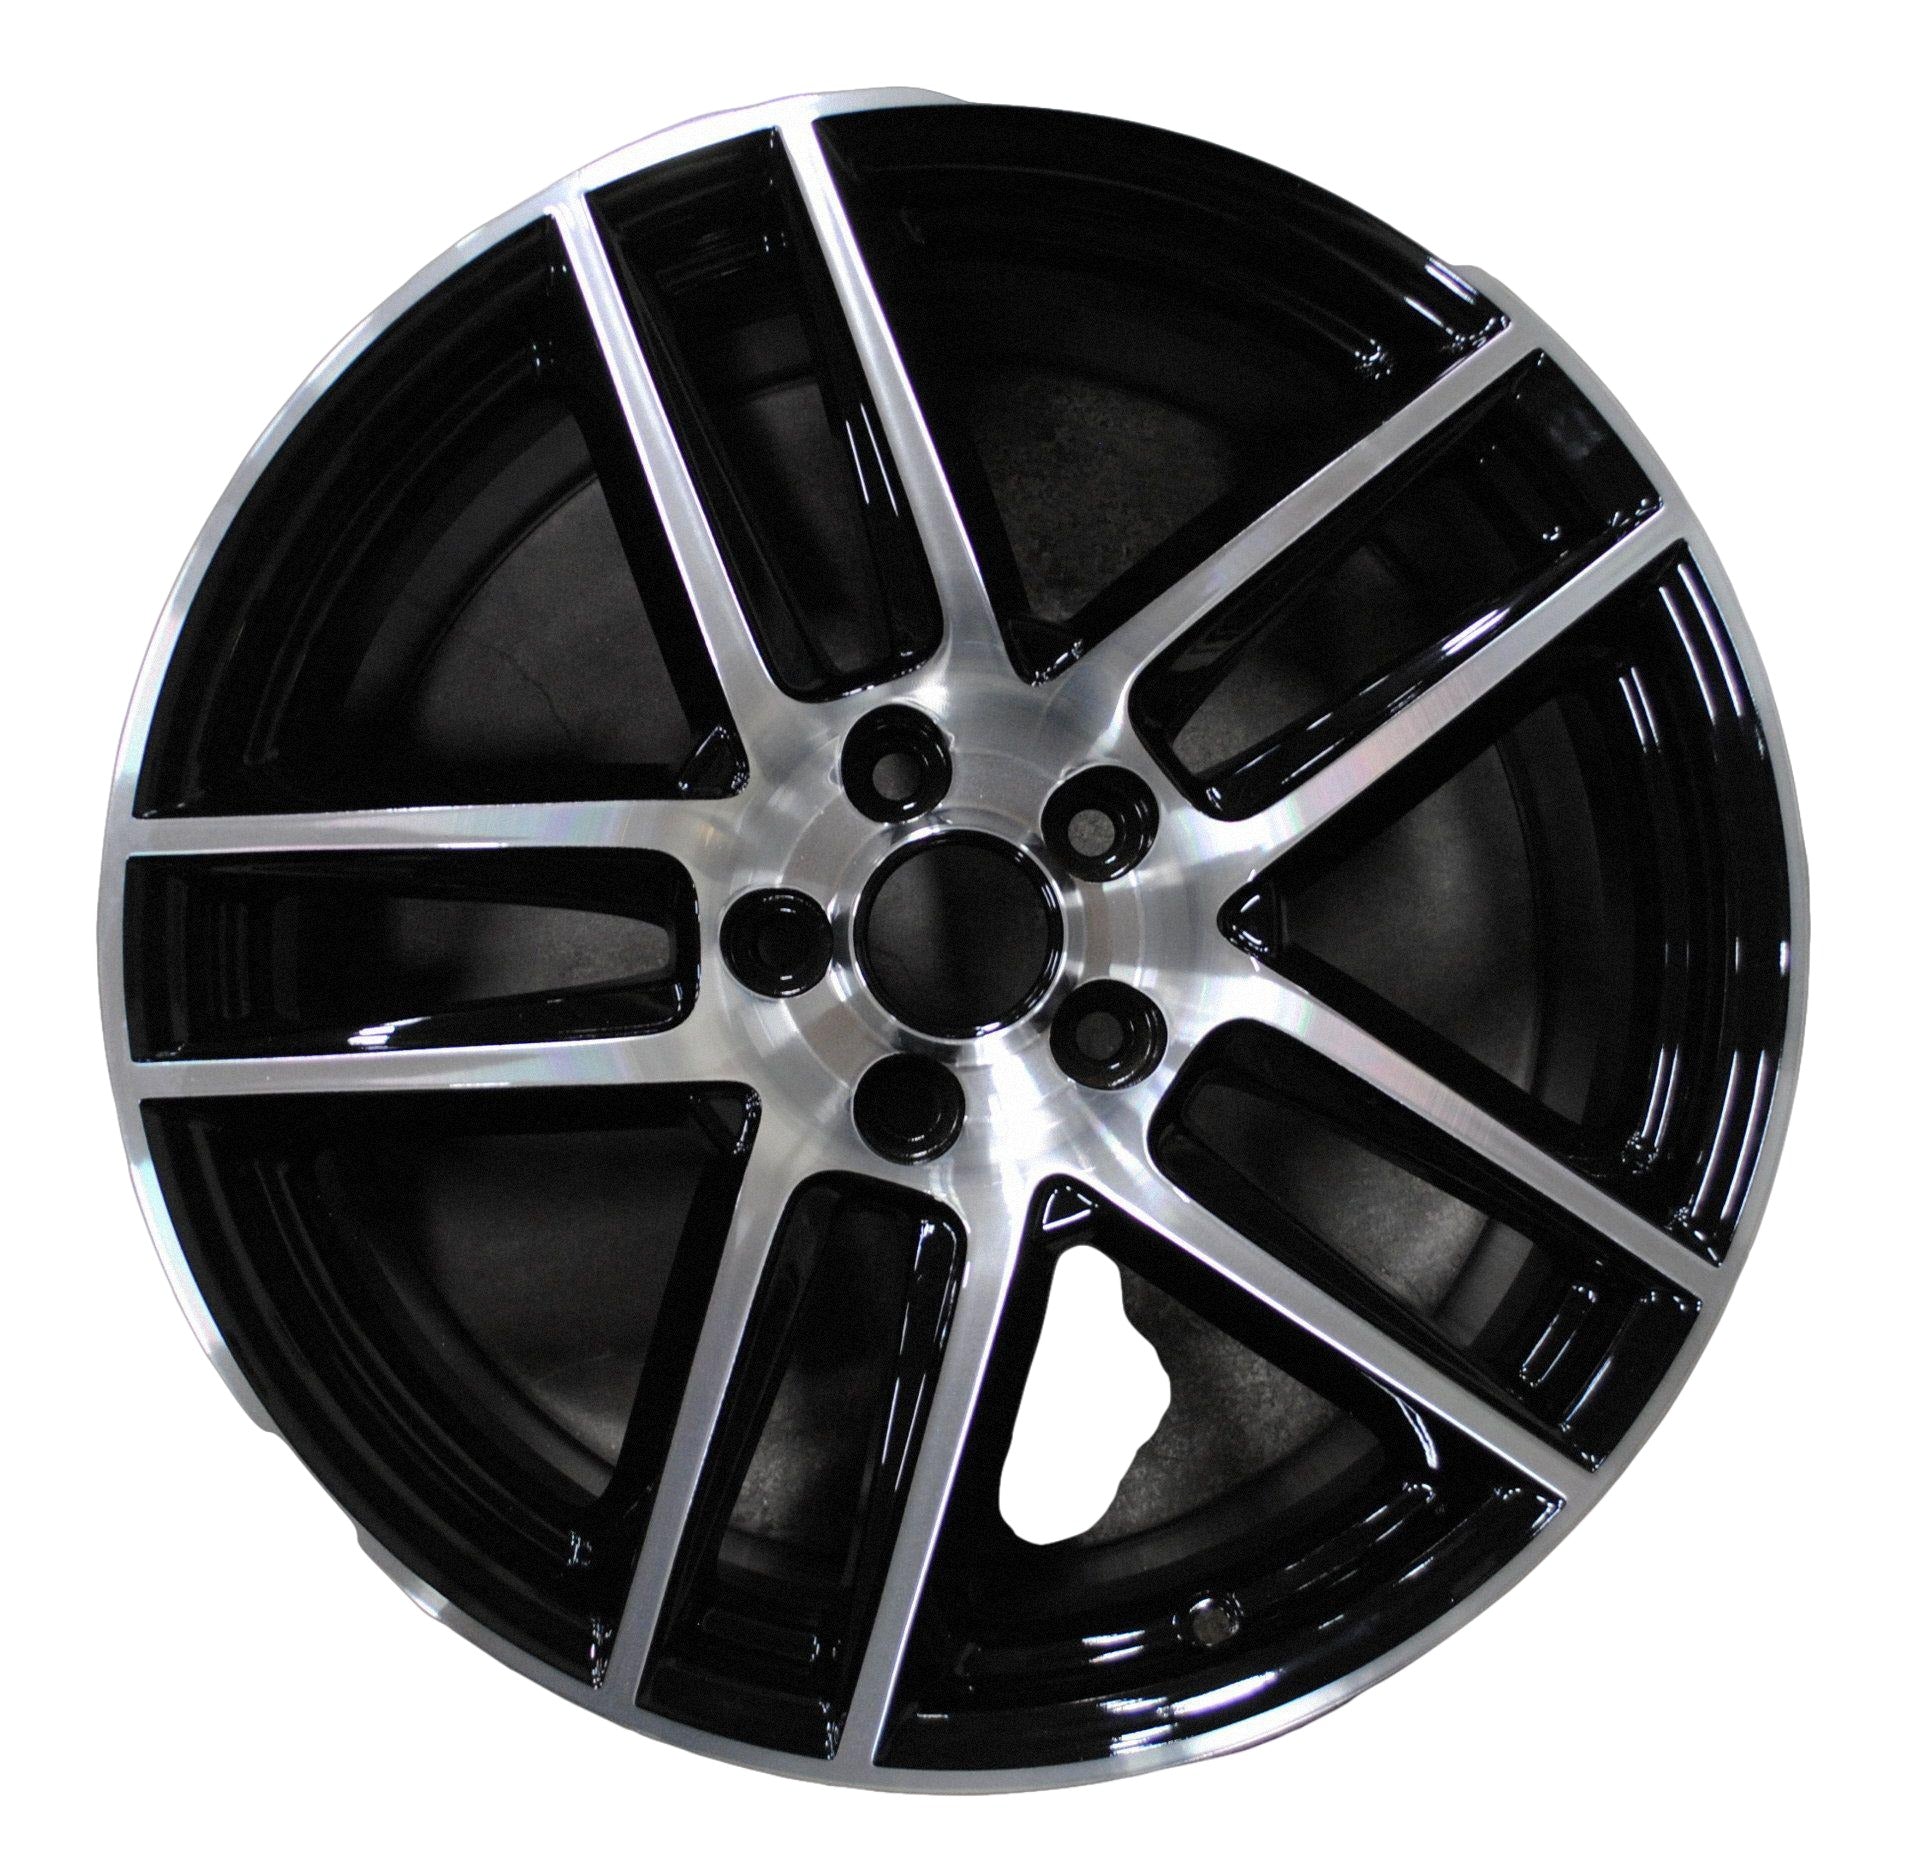 Ford Mustang  2012, 2013 Factory OEM Car Wheel Size 19x10 Alloy WAO.3890RE.PB01.MA